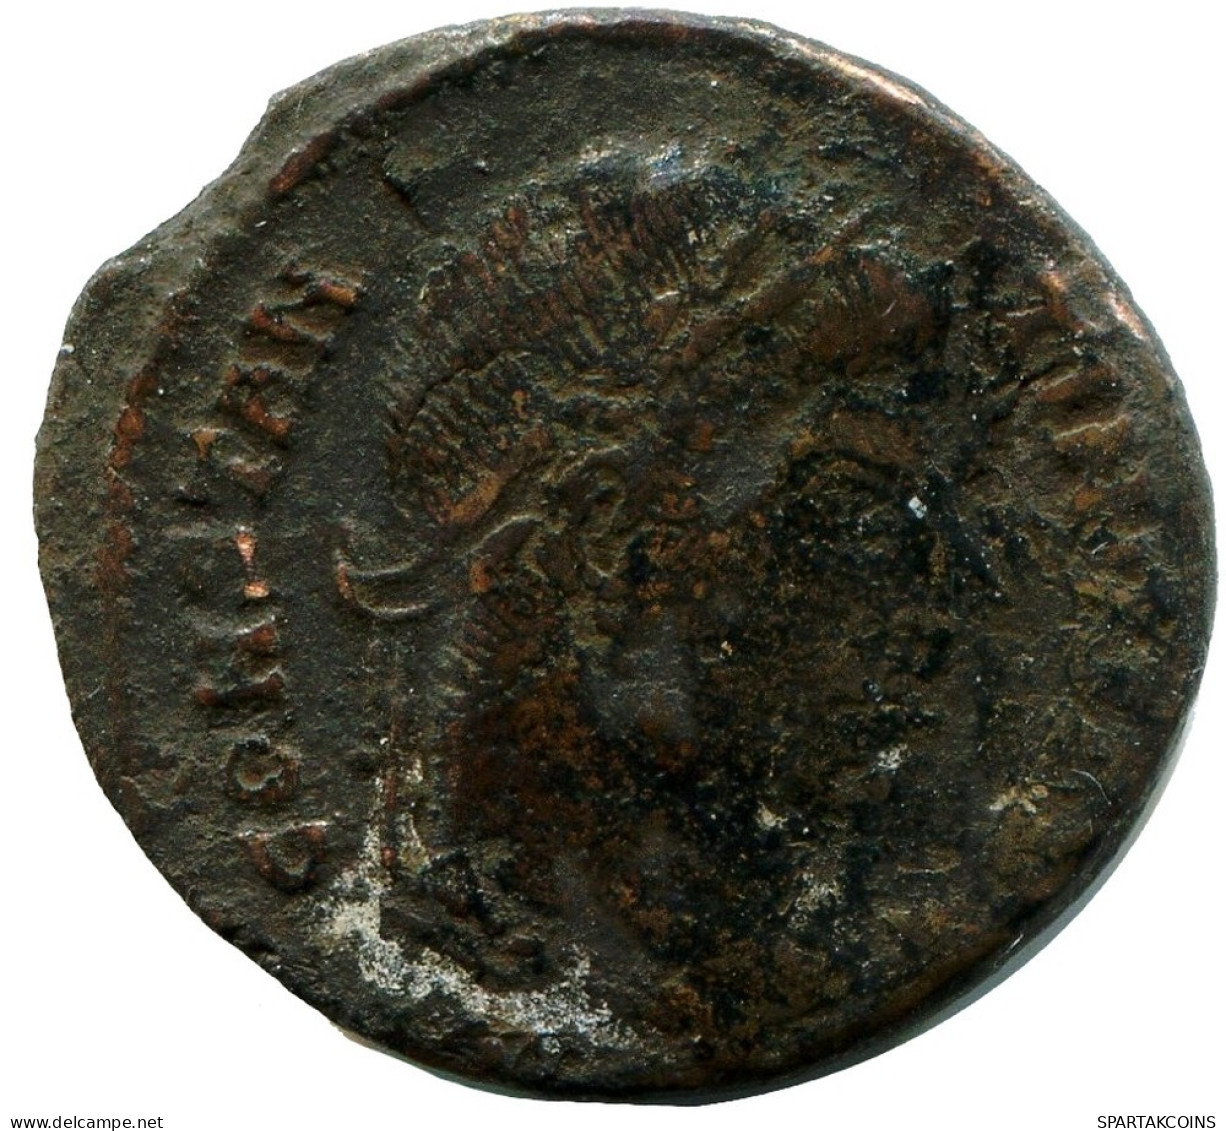 CONSTANTINE I MINTED IN ROME ITALY FOUND IN IHNASYAH HOARD EGYPT #ANC11156.14.E.A - L'Empire Chrétien (307 à 363)